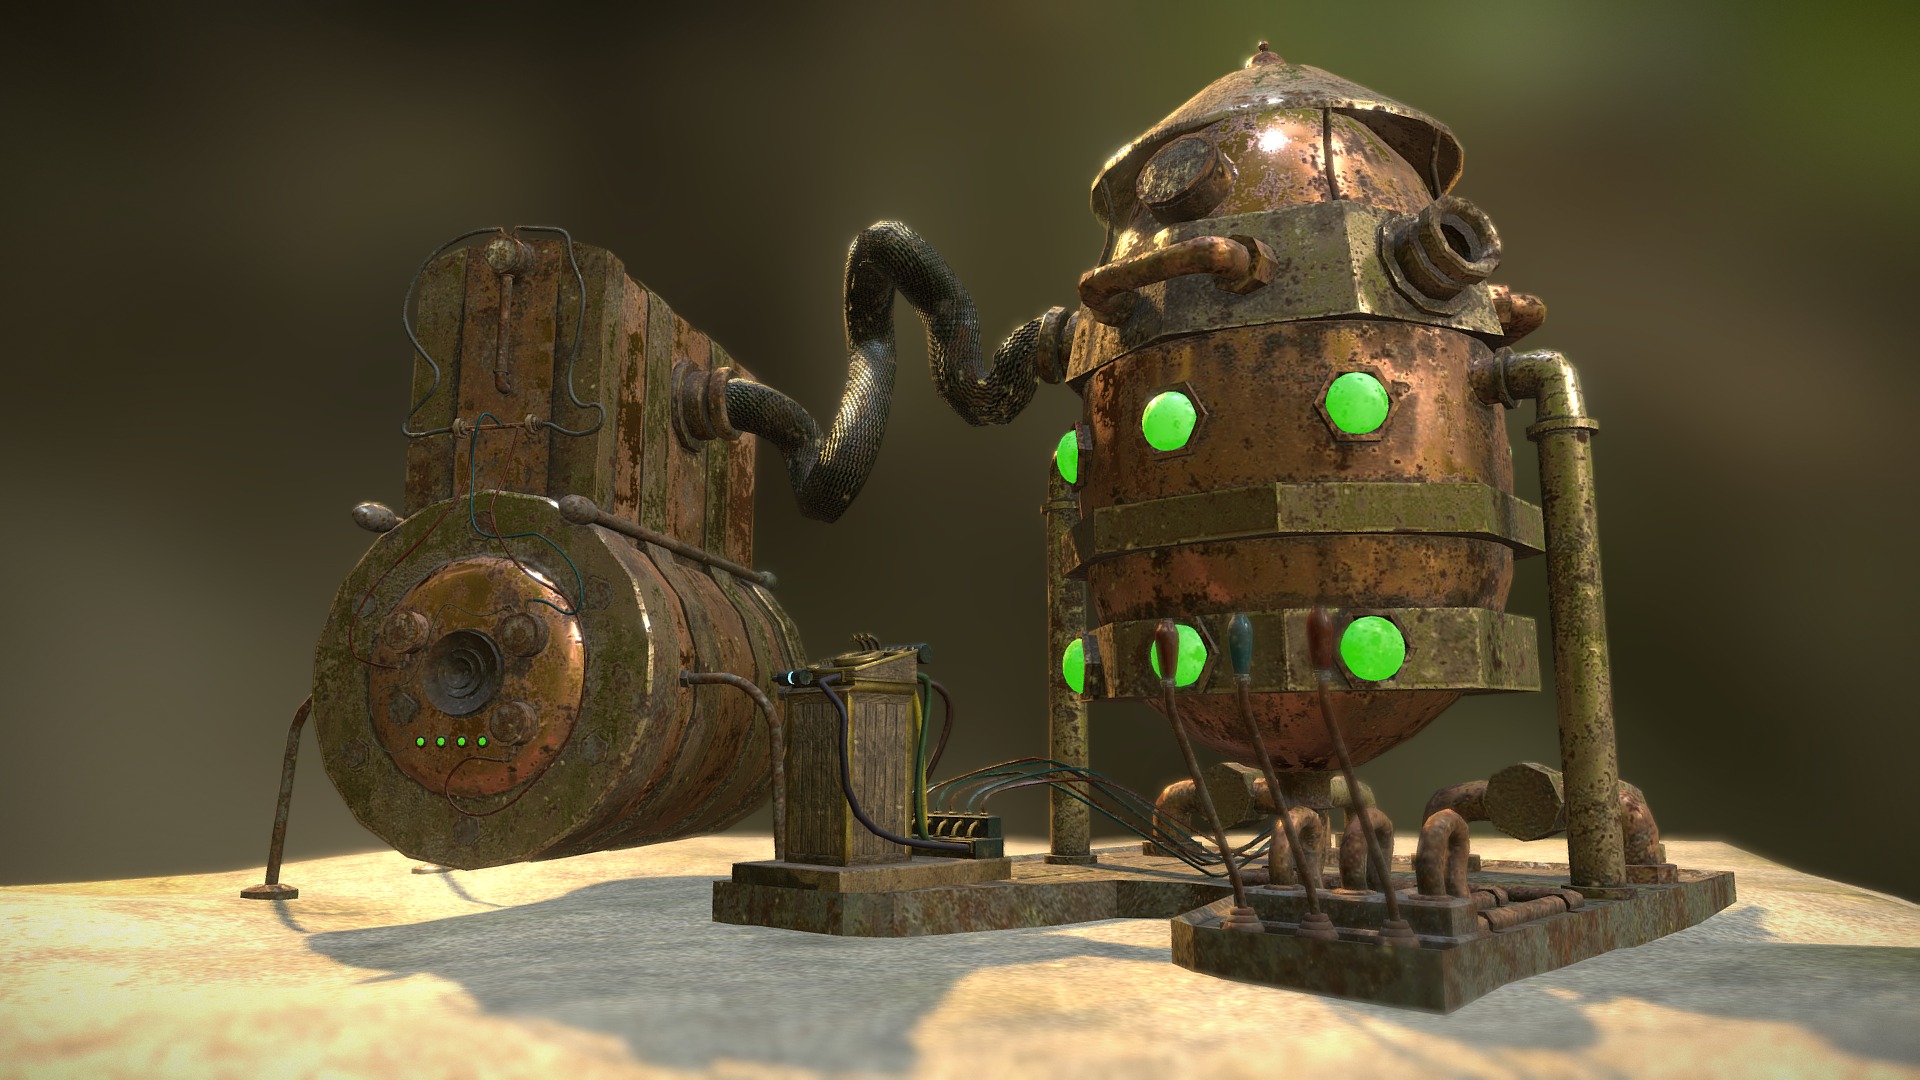 3D model [Animation] Steampunk Brutal Machine - This is a 3D model of the [Animation] Steampunk Brutal Machine. The 3D model is about a couple of metal objects with green lights on them.